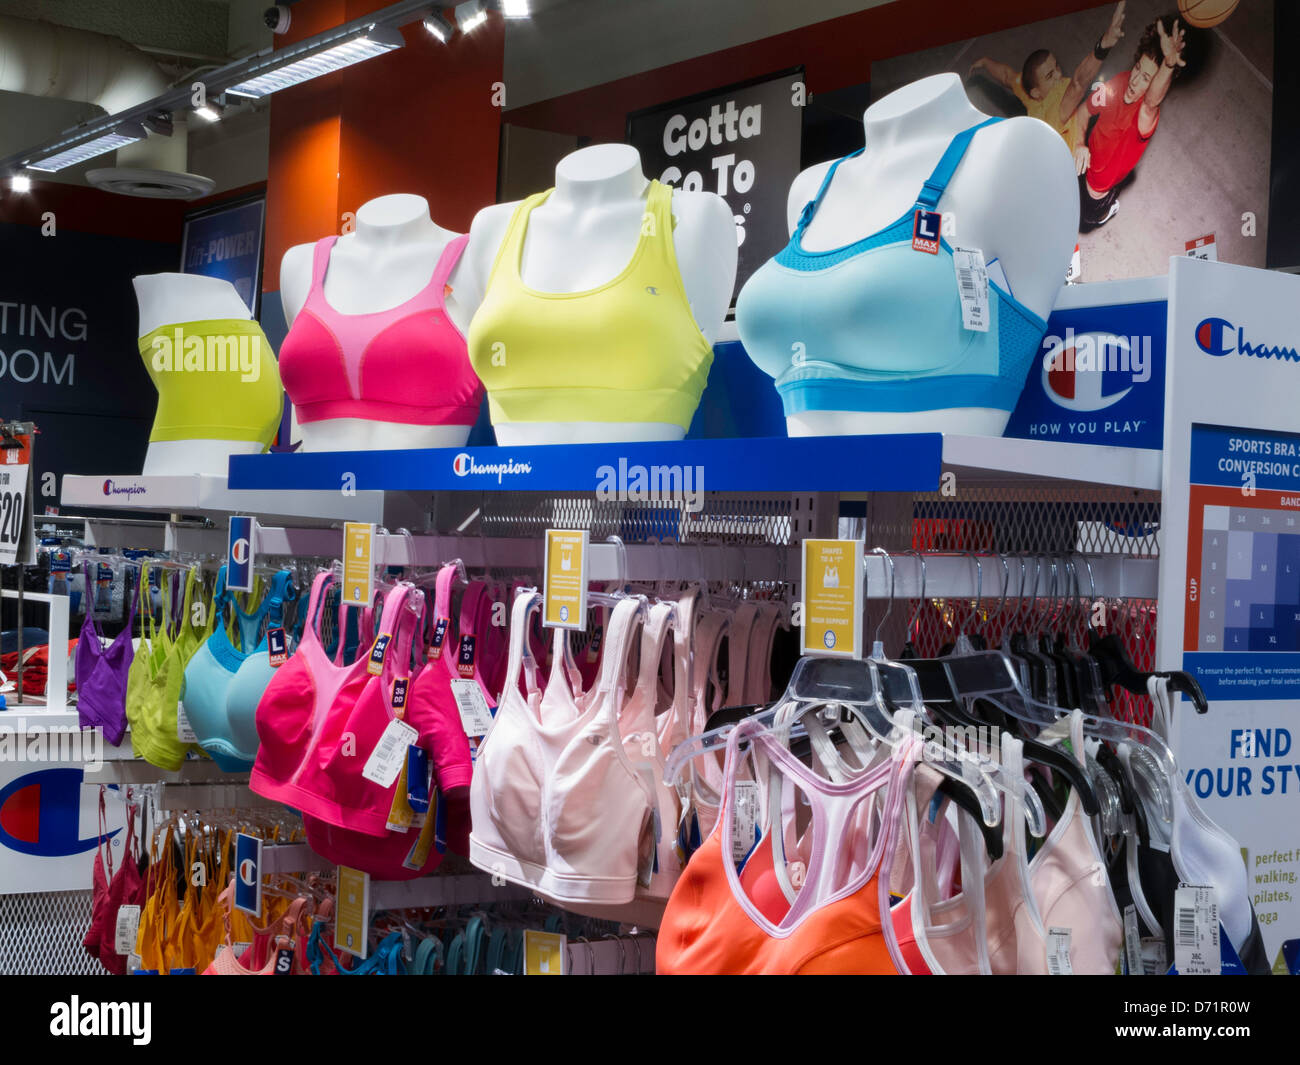 Sports Bras Display, Modell's Sporting Goods Store Interior, NYC